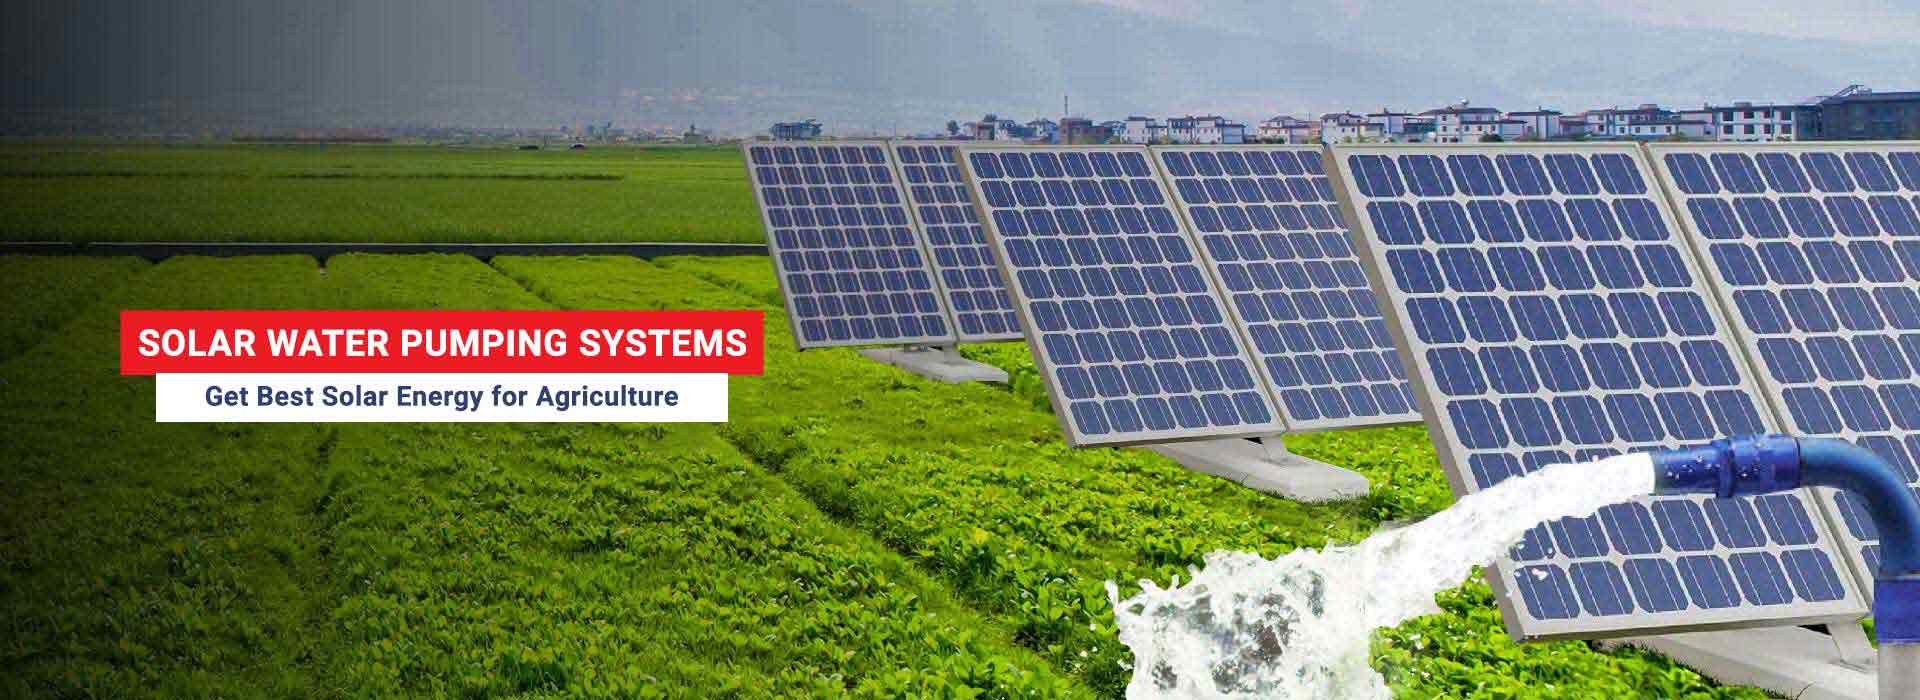 Solar Water Pumping Systems in Meghalaya